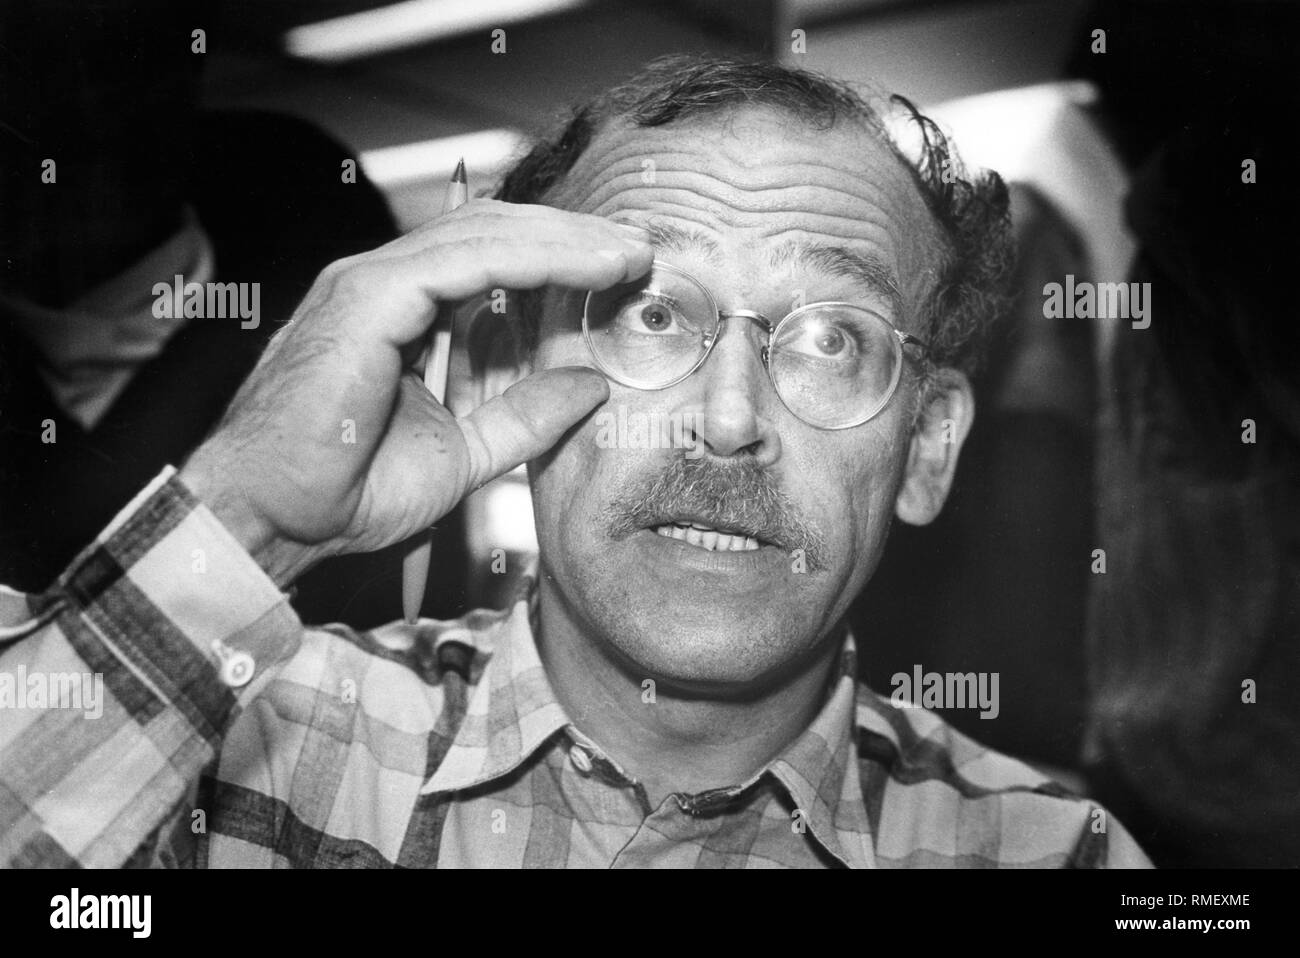 Guenter Wallraff, writer / journalist. Undated photo, probably in the 1980s. Stock Photo